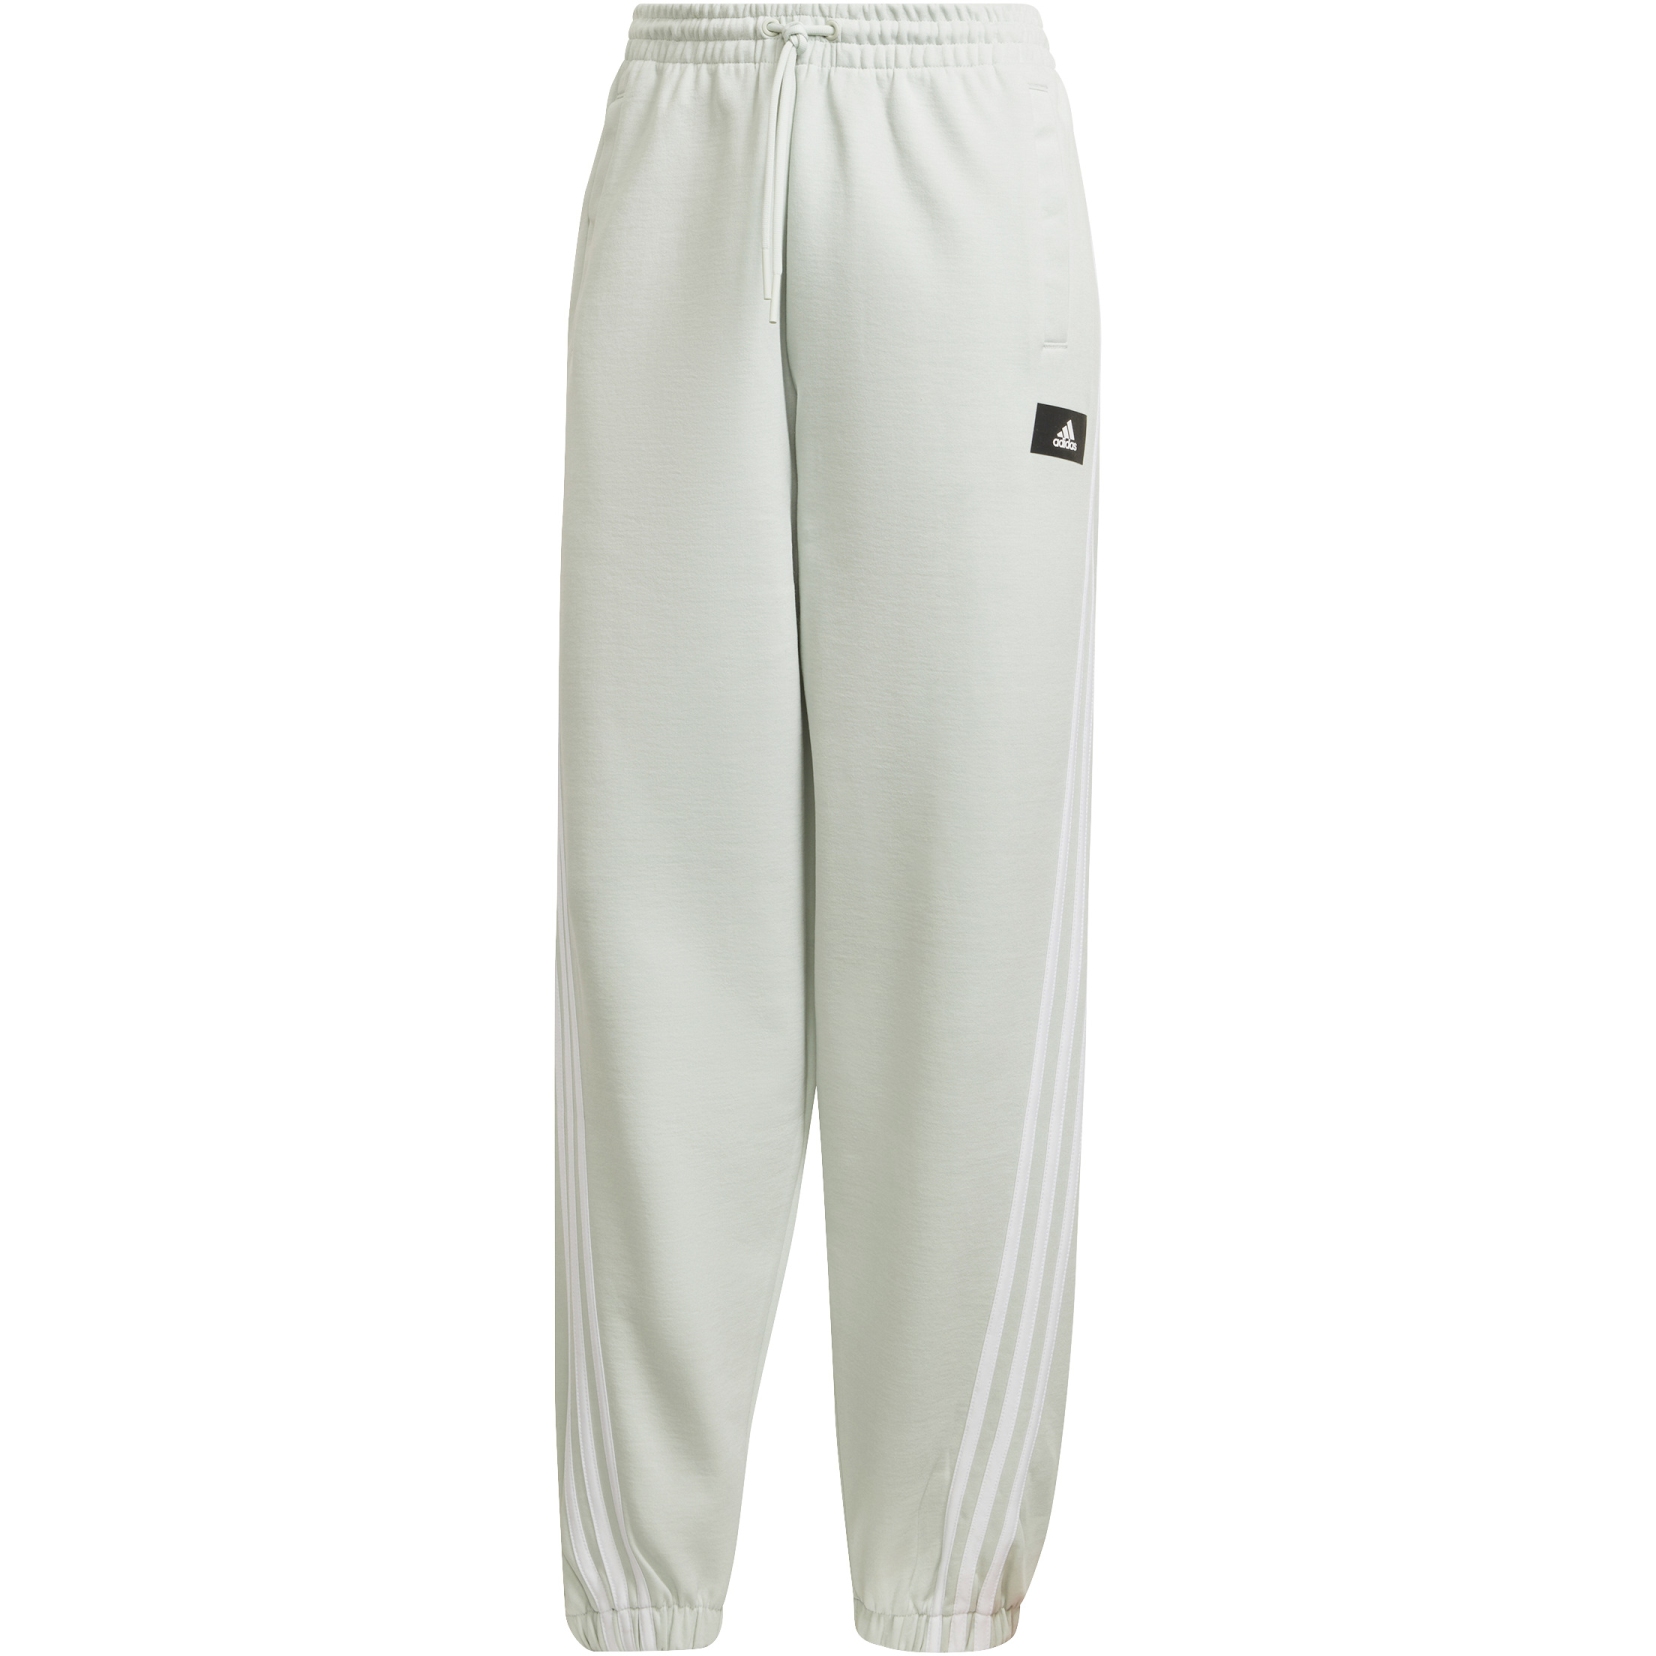 adidas Trousers & Lowers for Men sale - discounted price | FASHIOLA INDIA